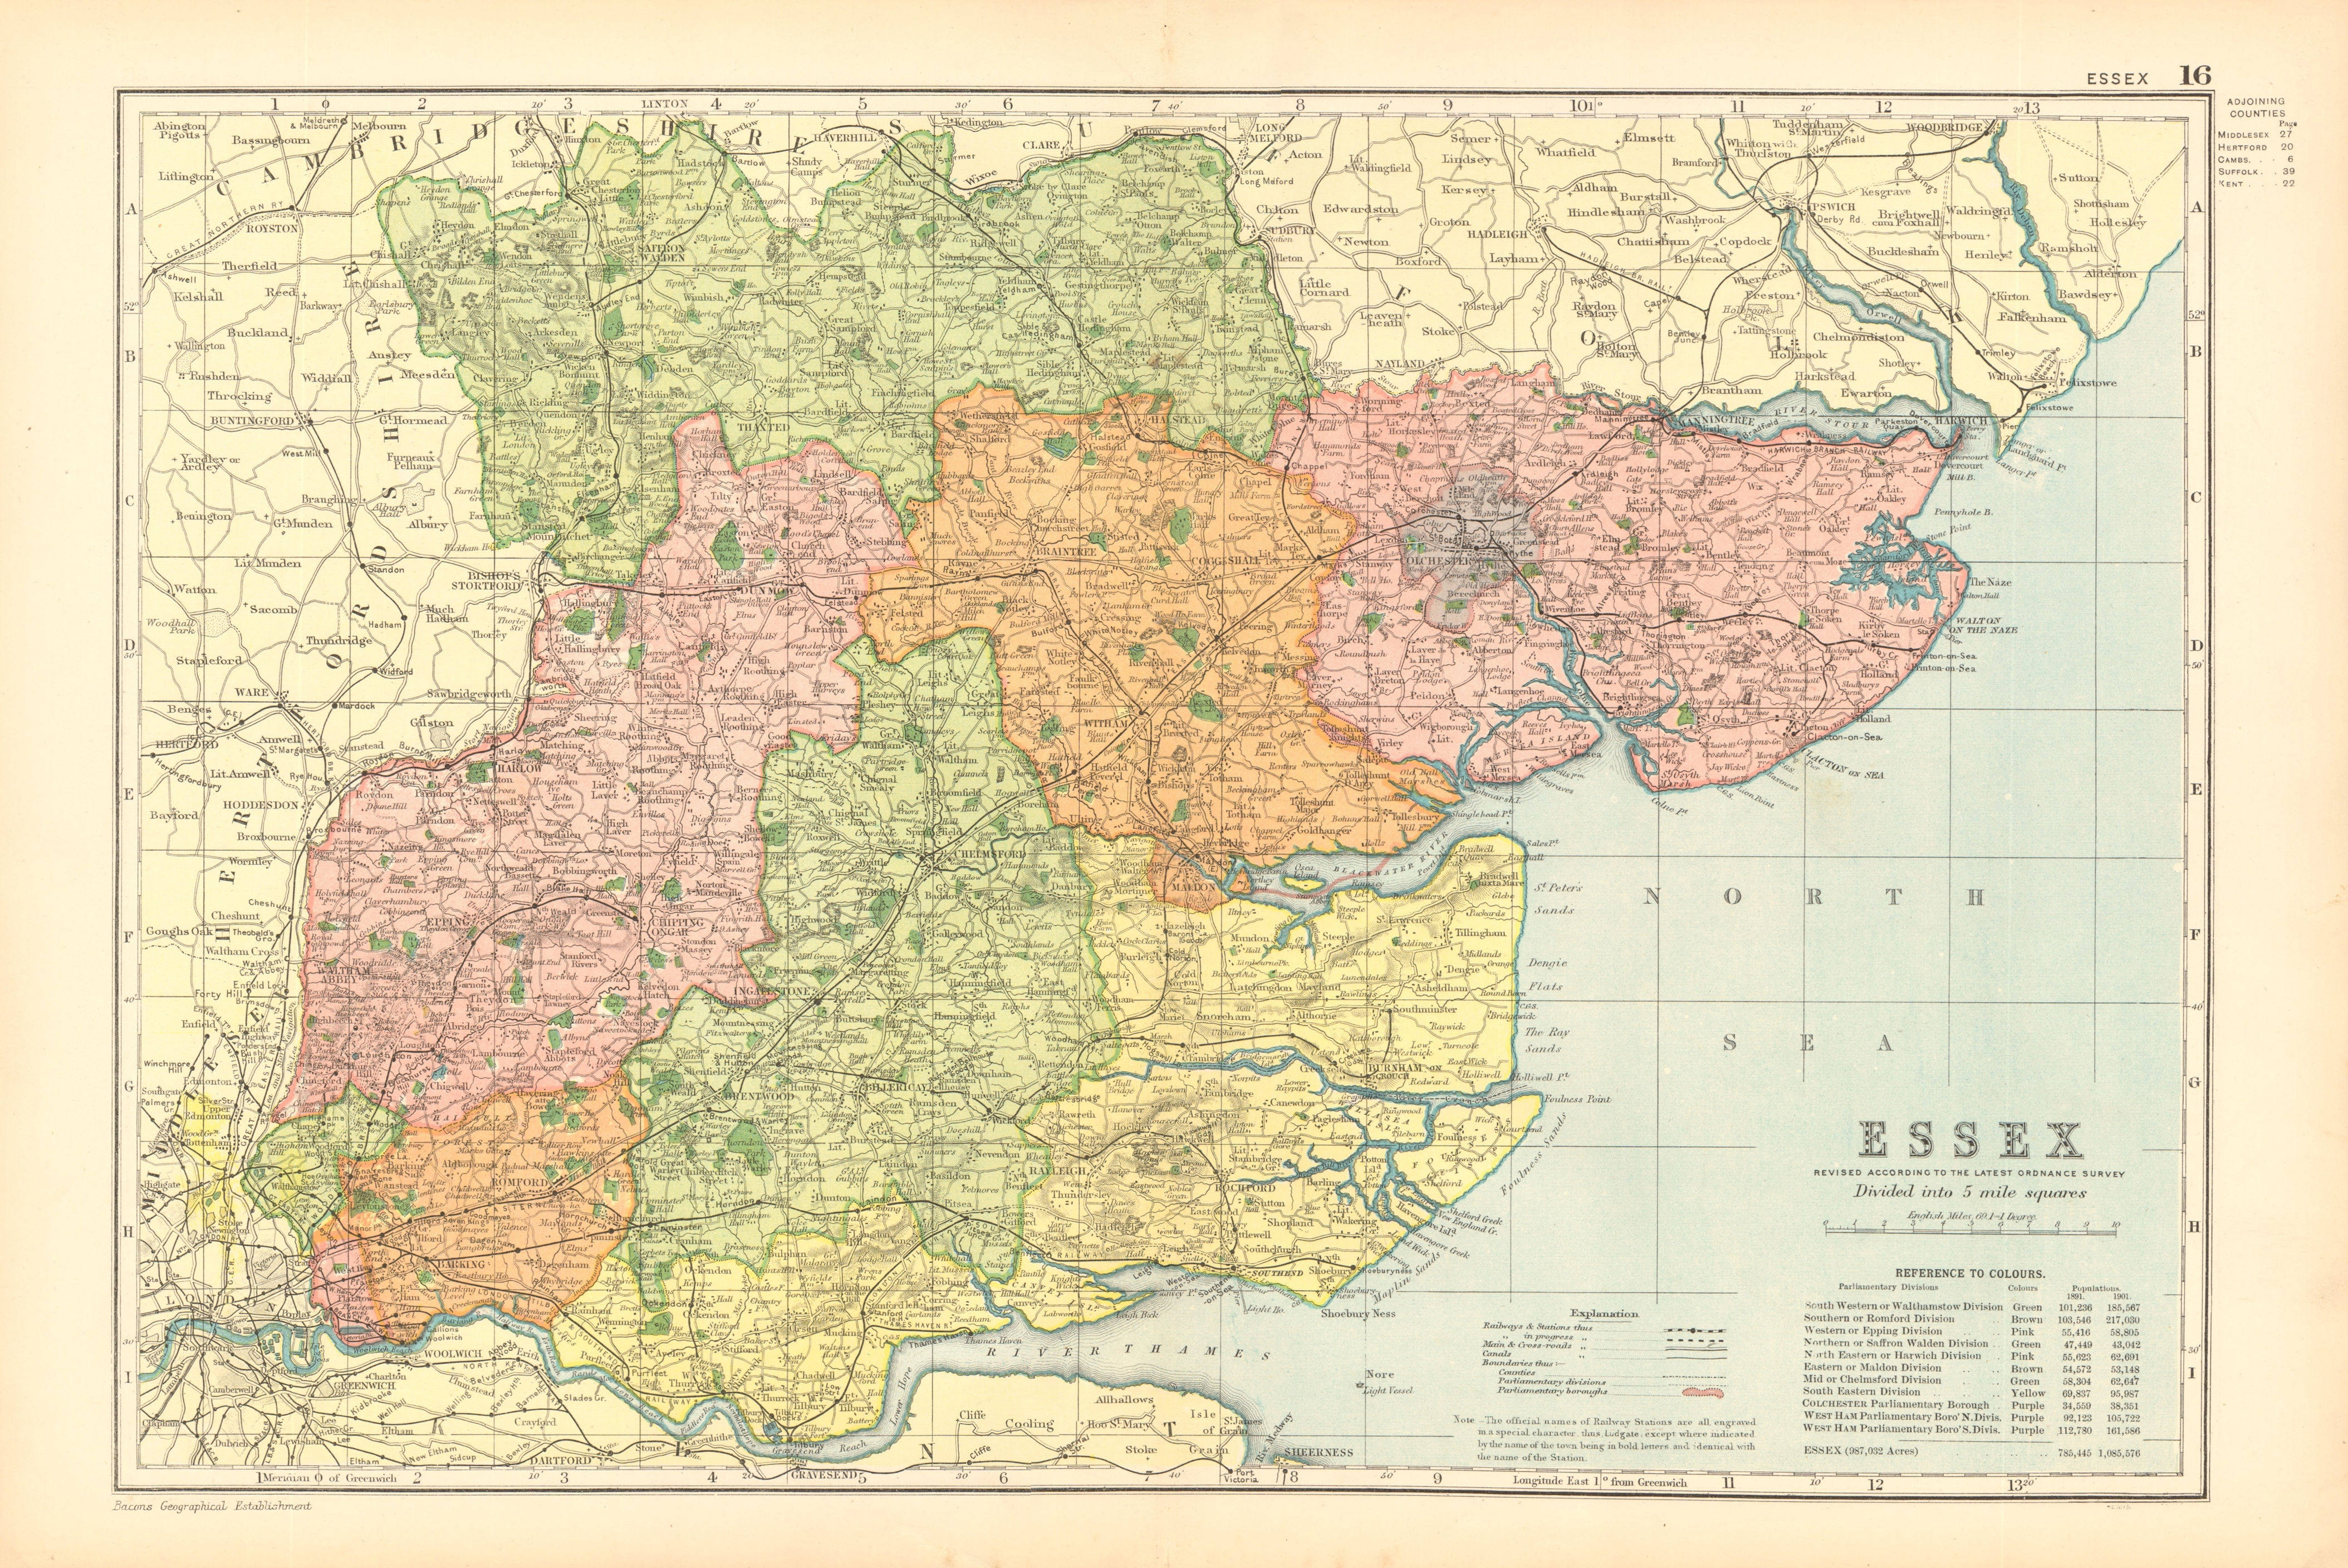 Associate Product ESSEX. Showing Parliamentary divisions, boroughs & parks. BACON 1904 old map